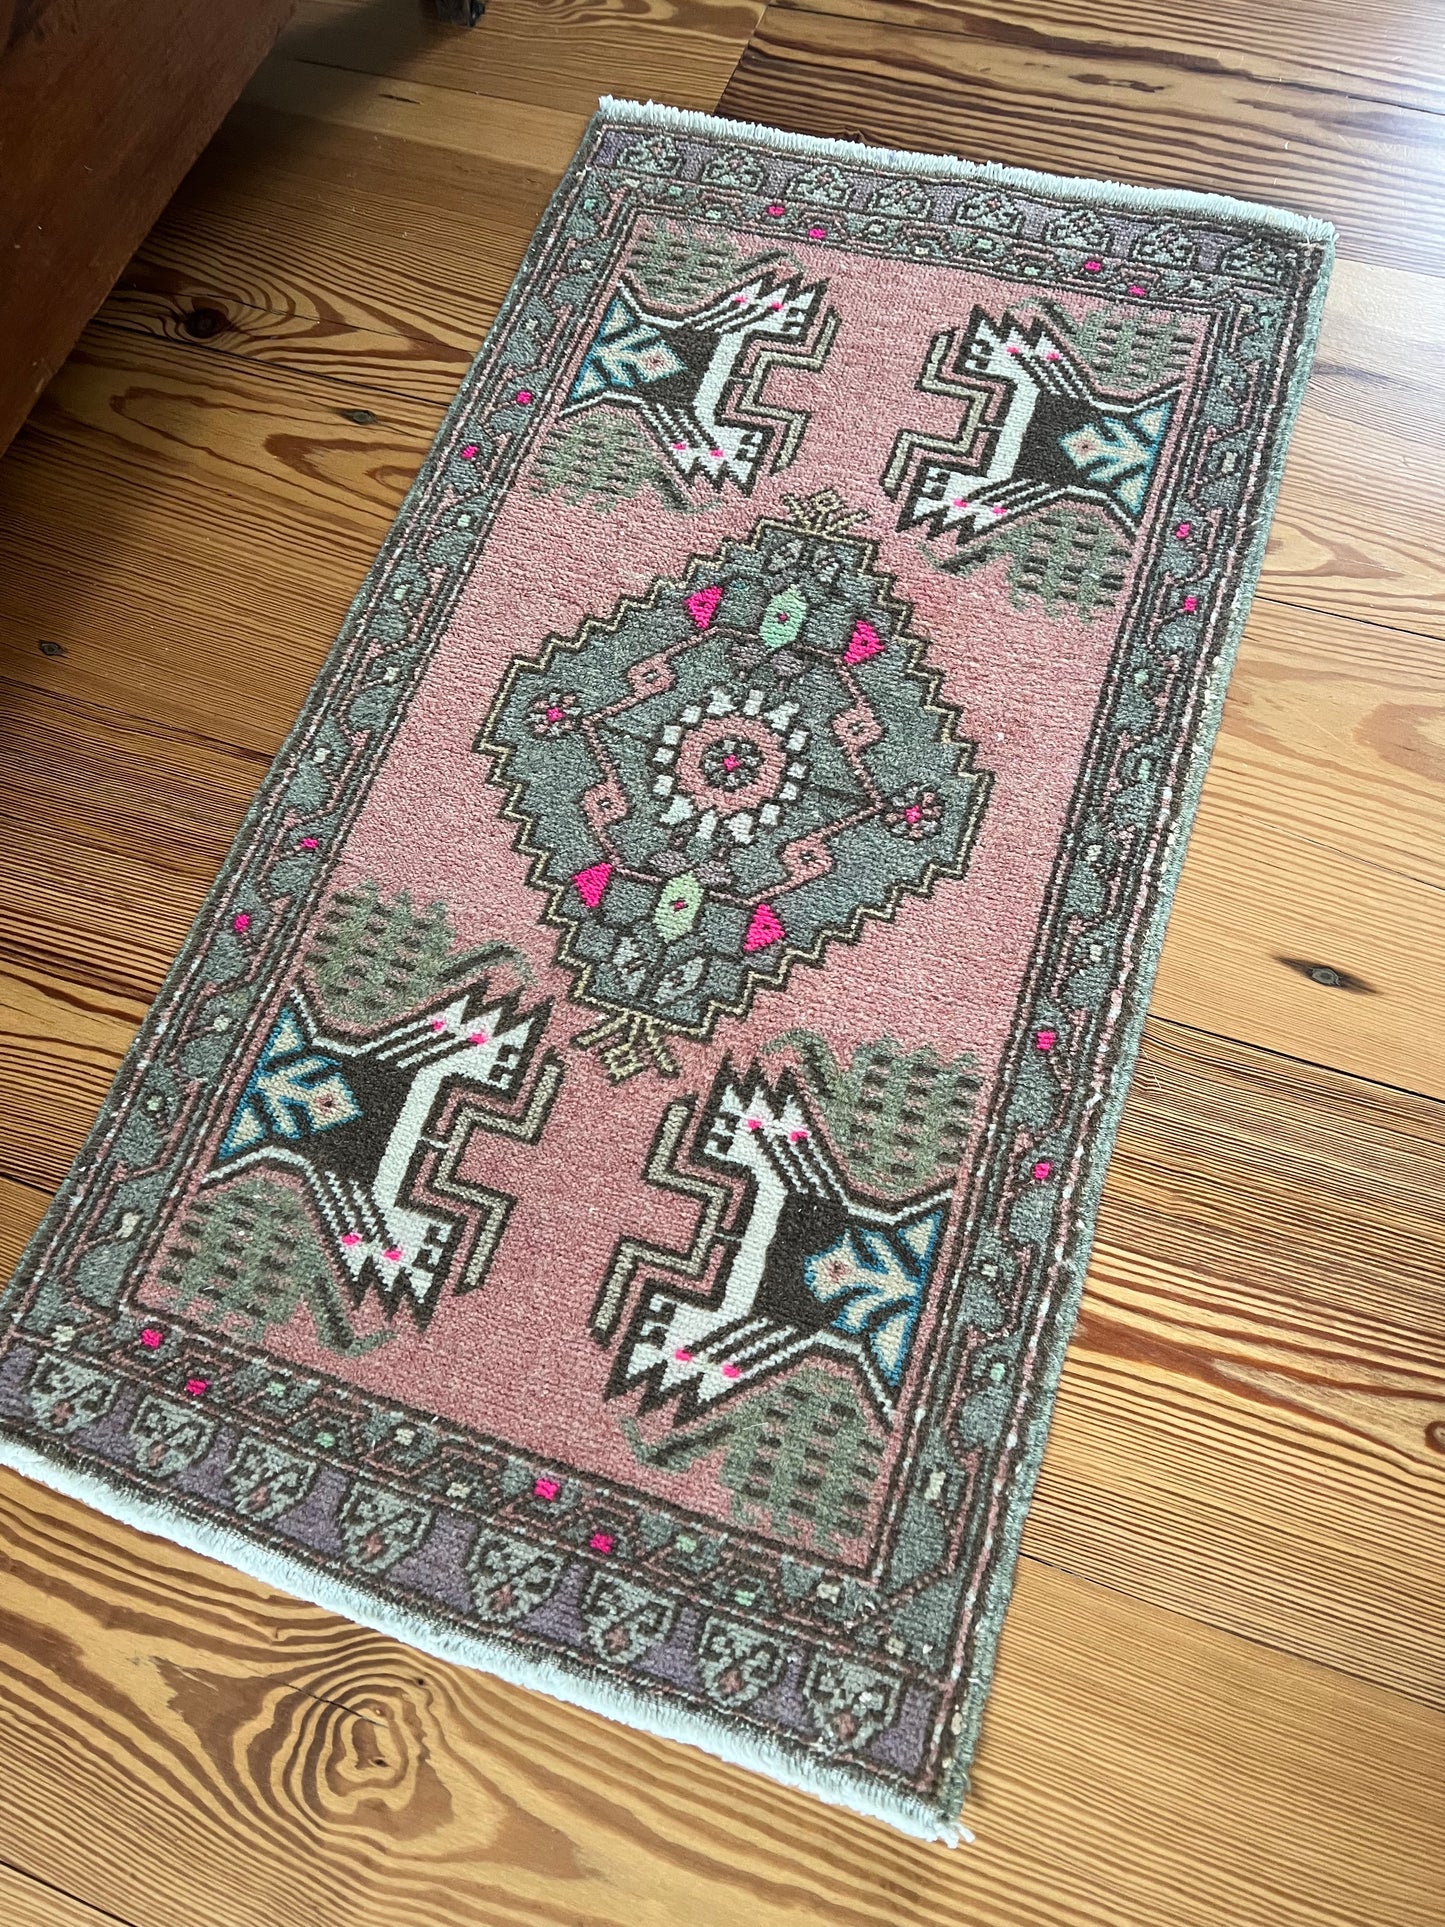 1'9" x 3'4" Turkish Mat with Pink